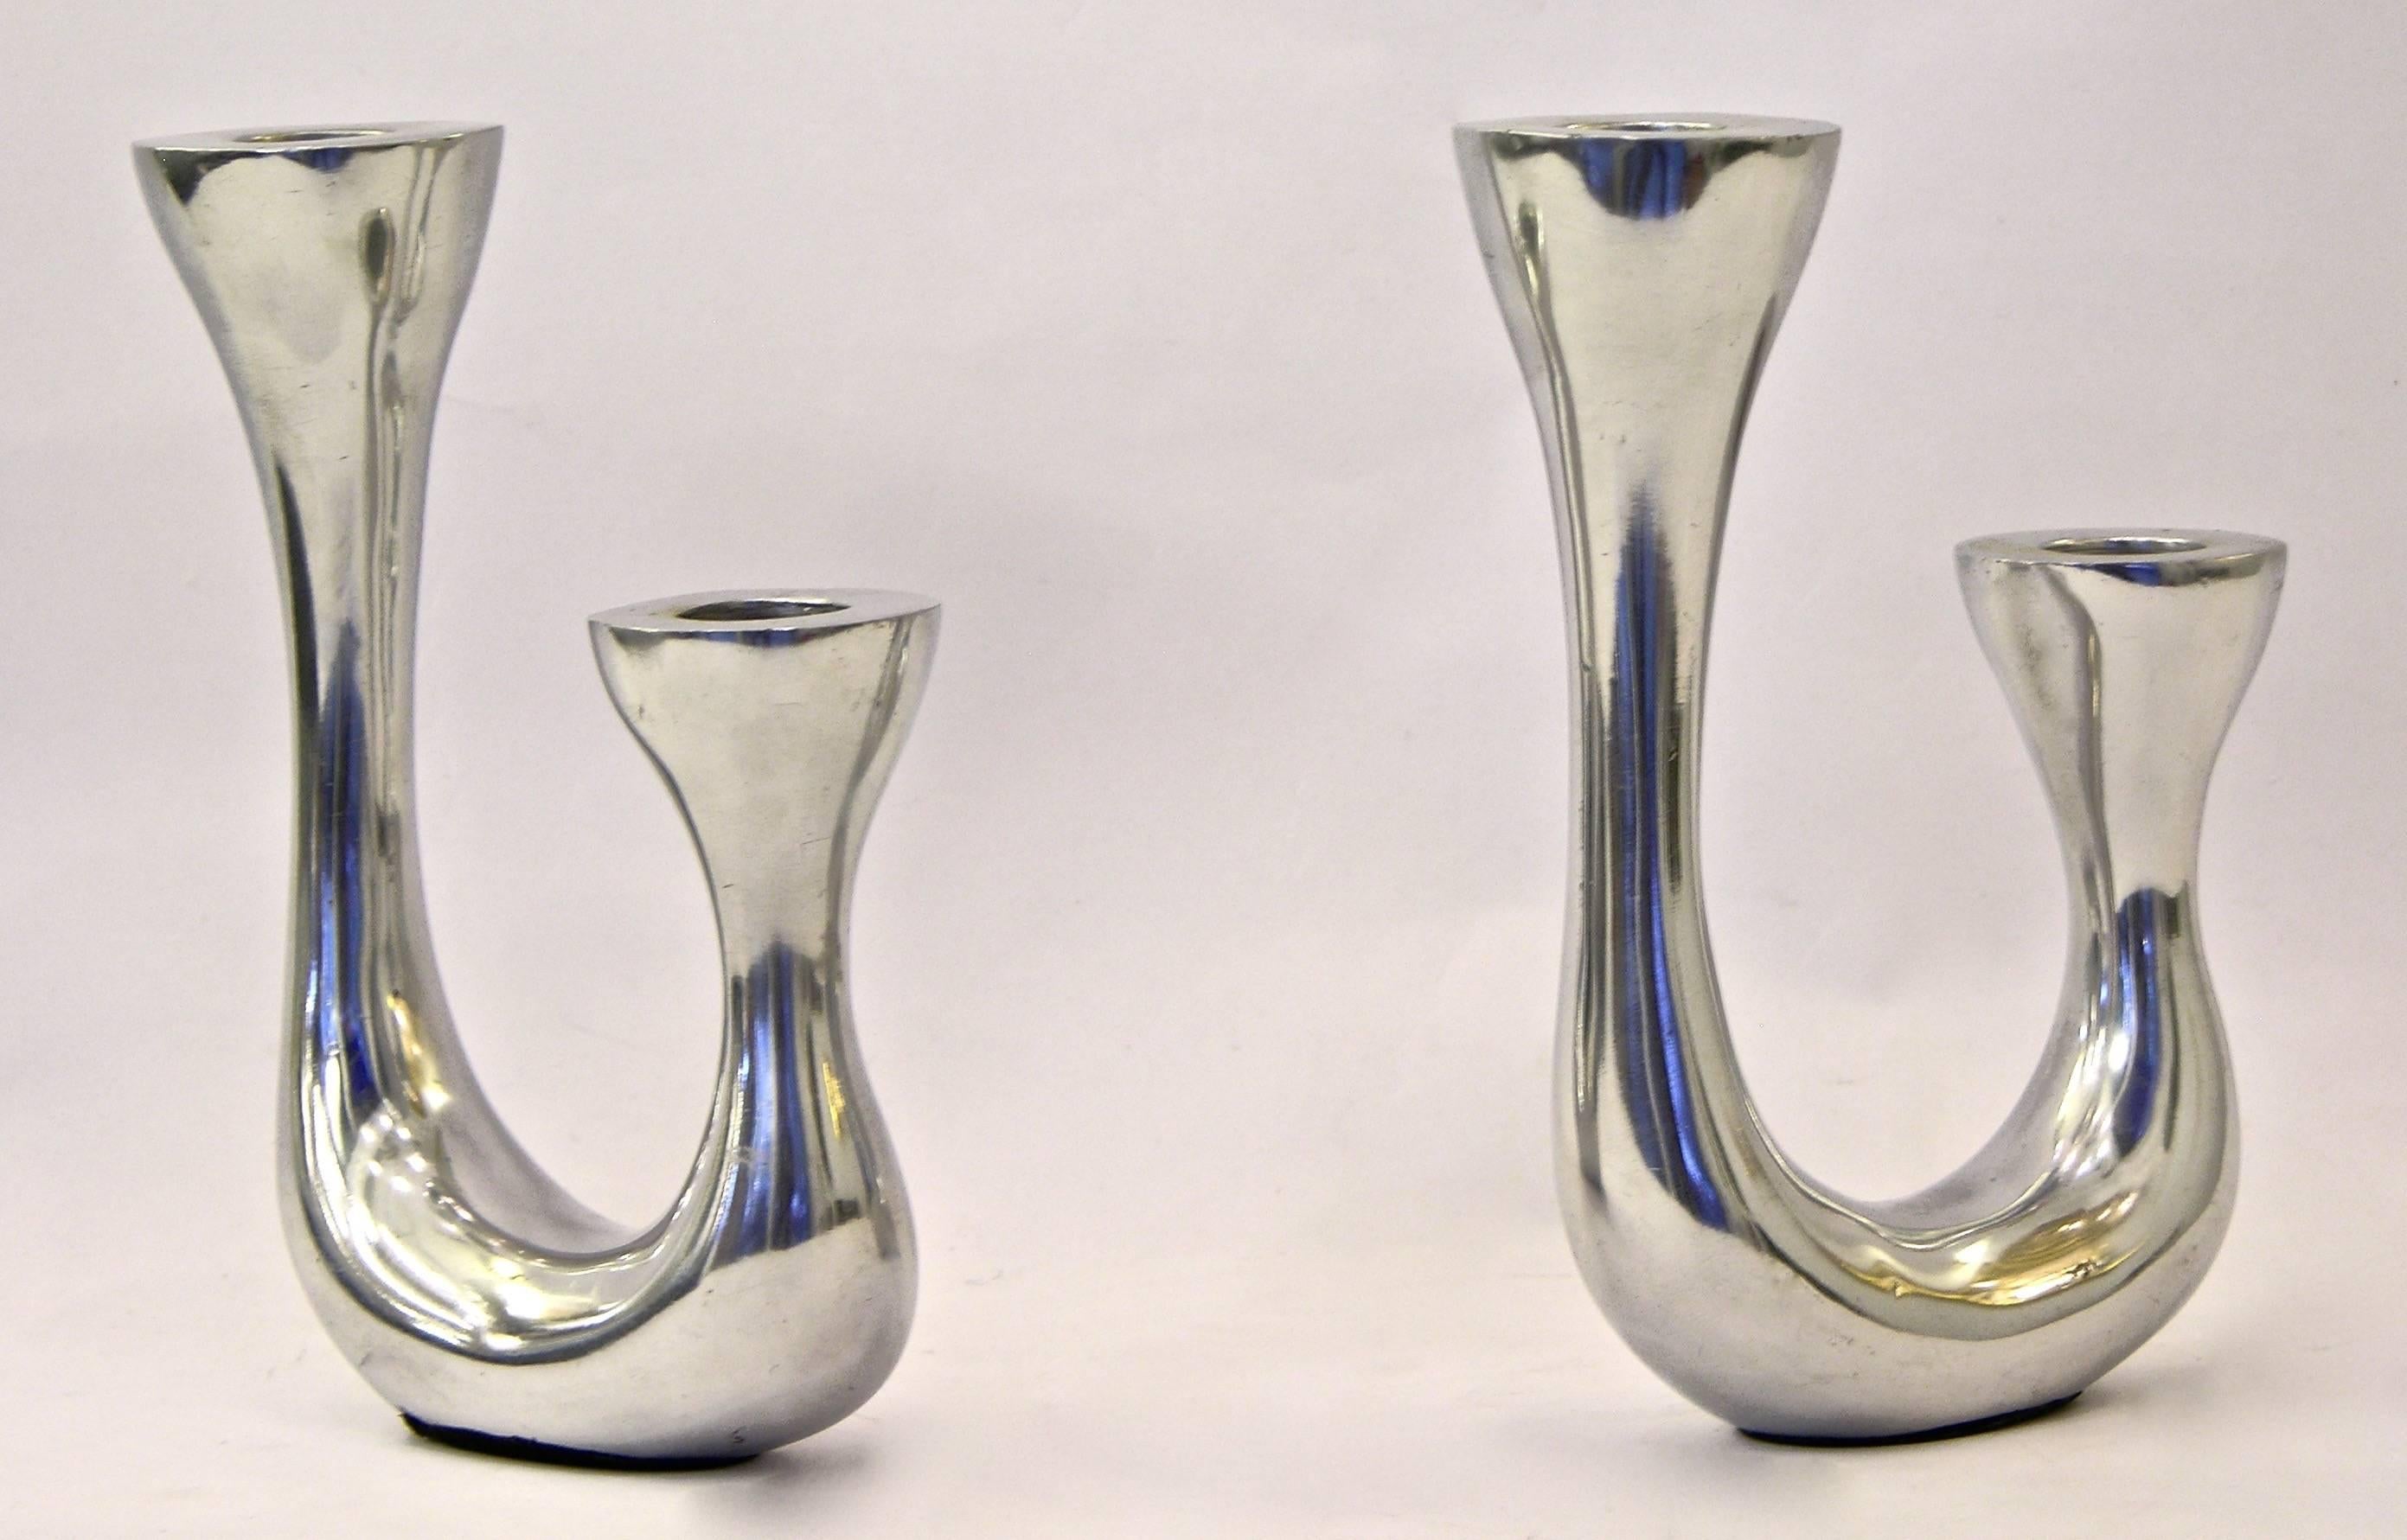 1970s Vintage Italian Pair of Polished Cast Aluminum Modern Candlesticks For Sale 2